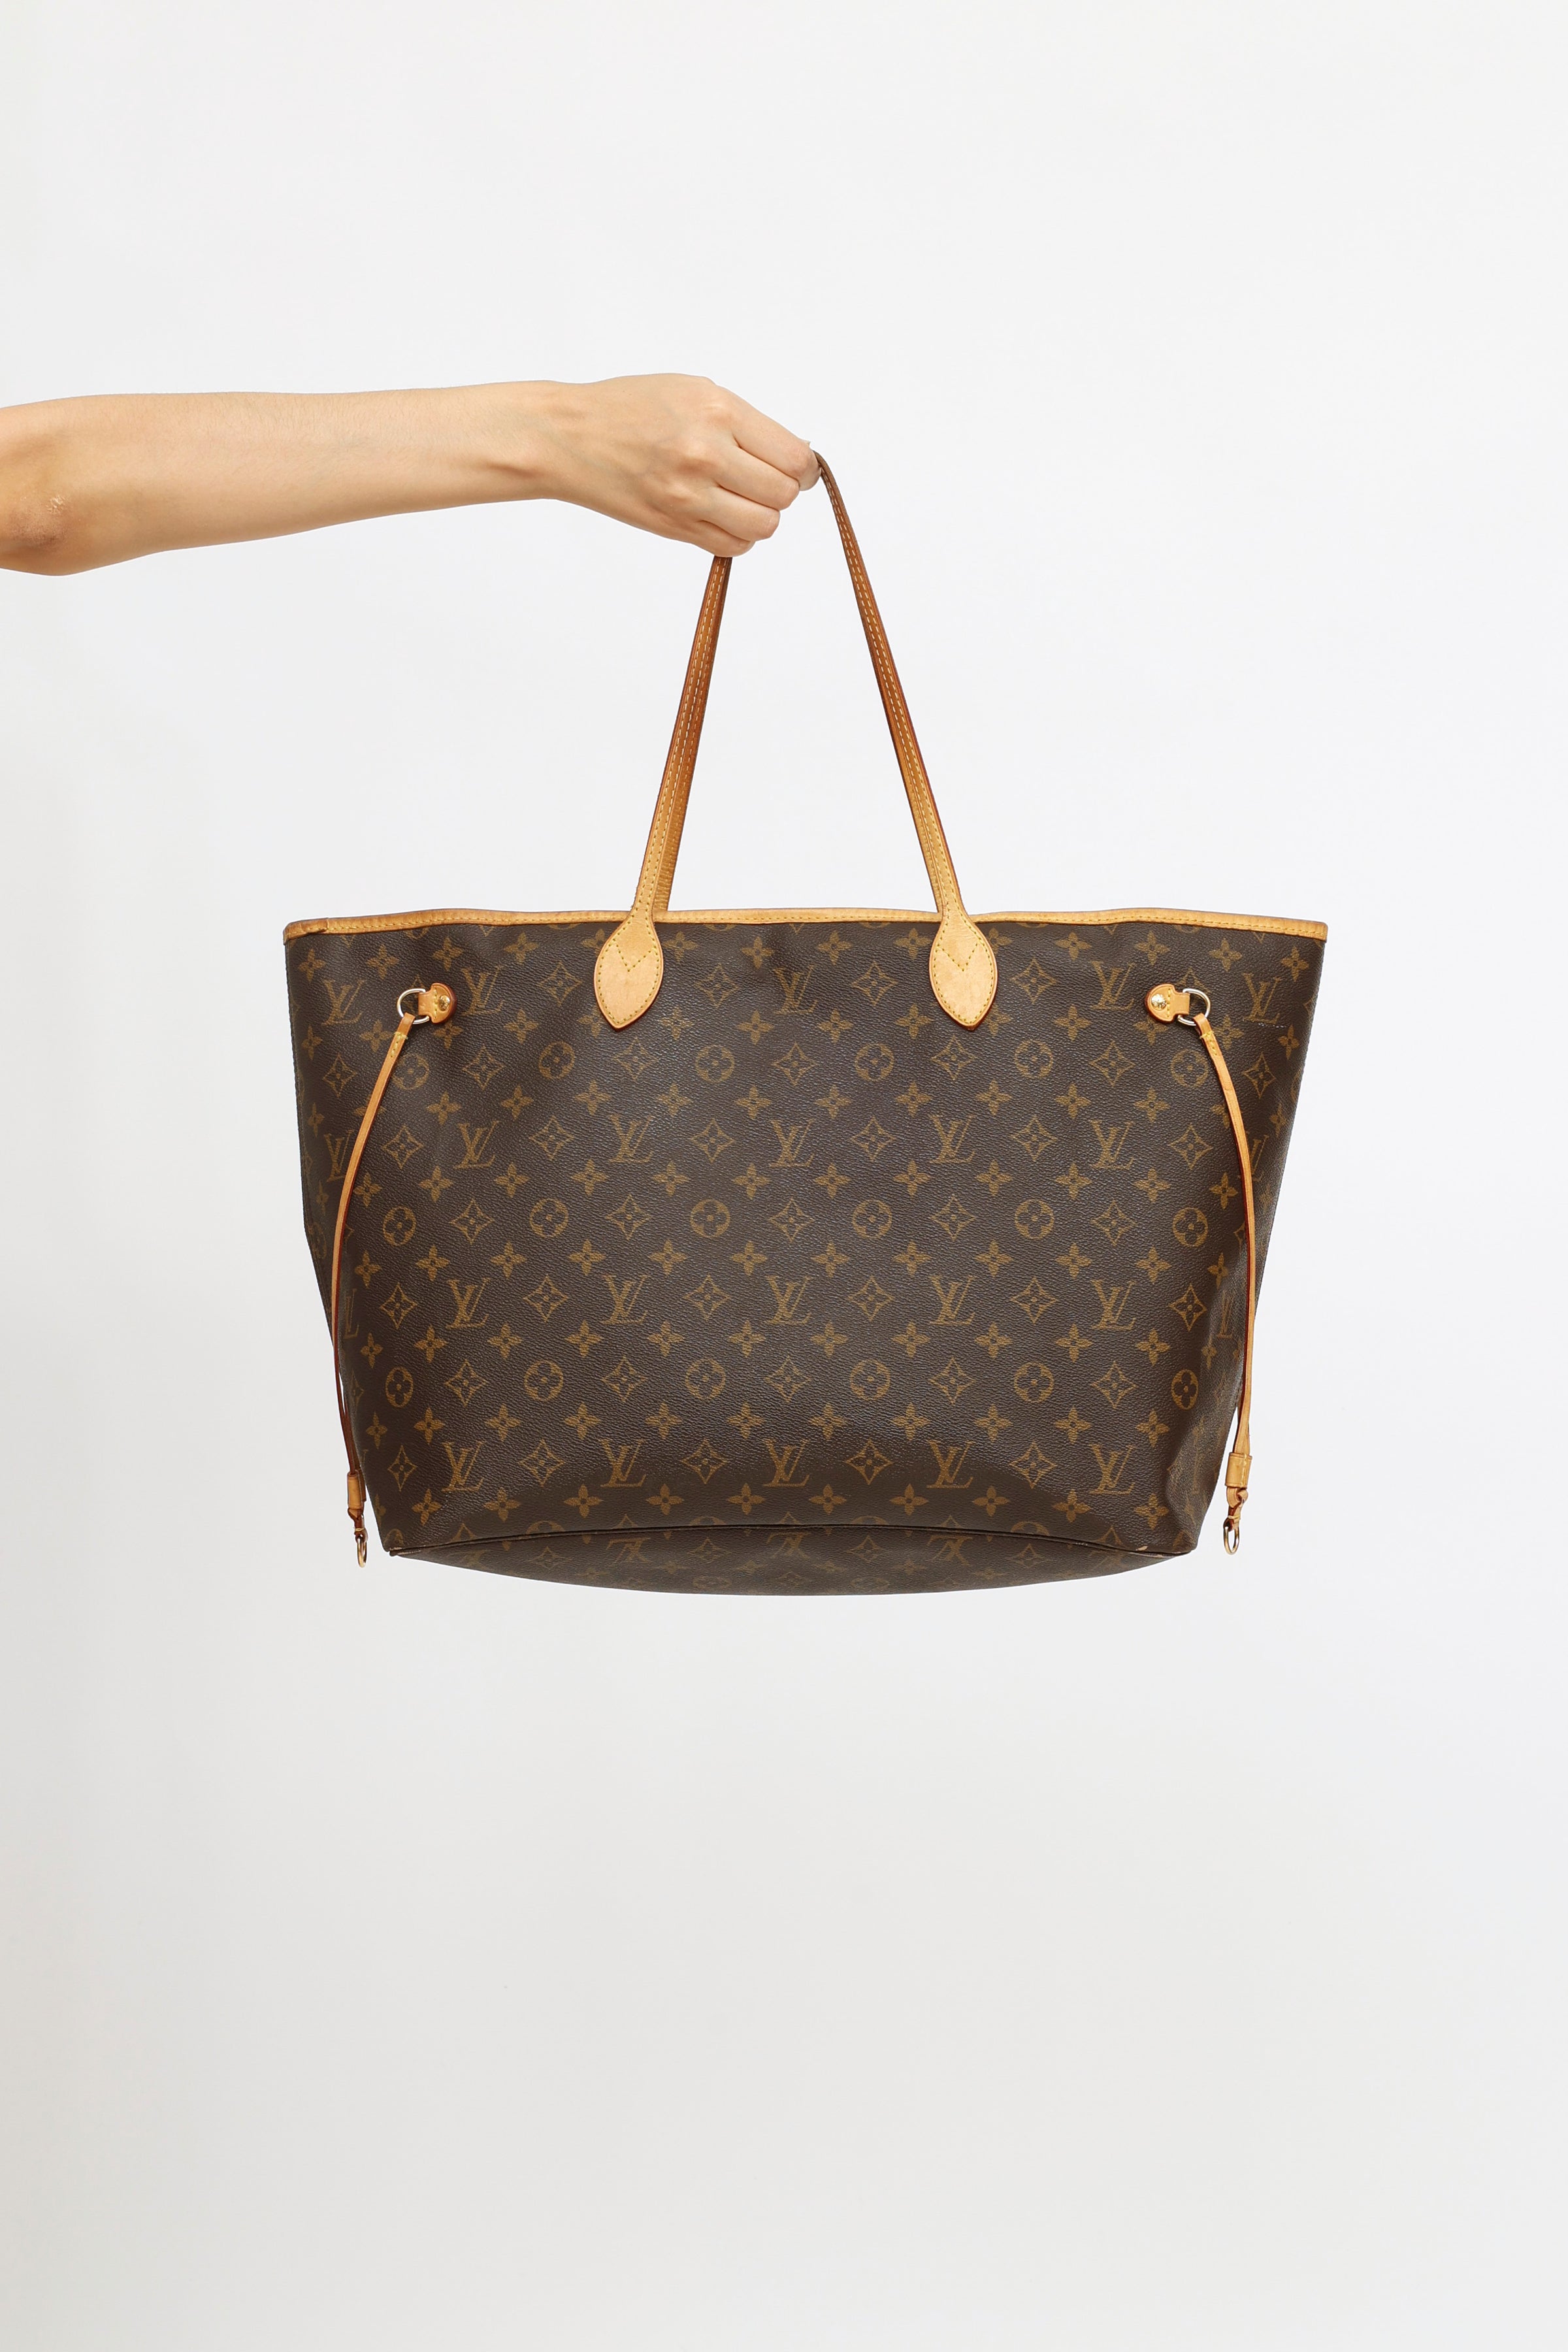 Louis Vuitton Neverfull GM in Monogram Good Vintage Condition 